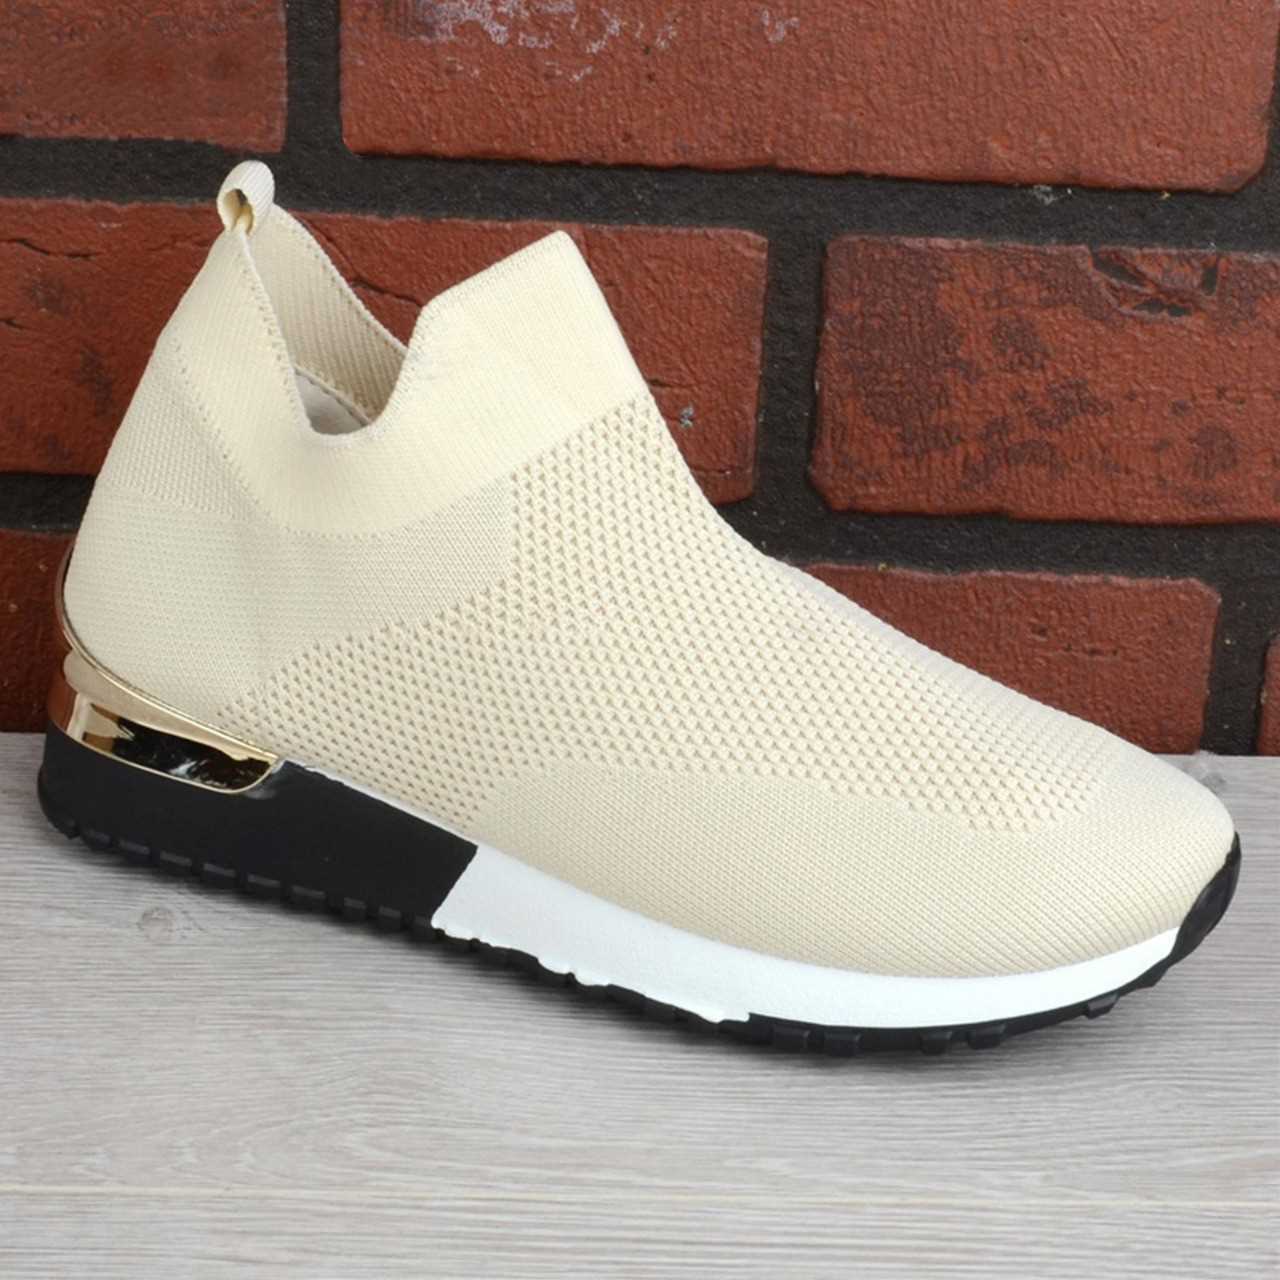 UK Size 3 EUR Size 36 Cream Khaki Ladies Womens Slip on Sock Wedge Sneakers Classic Jogging Pumps Shoes Trainers